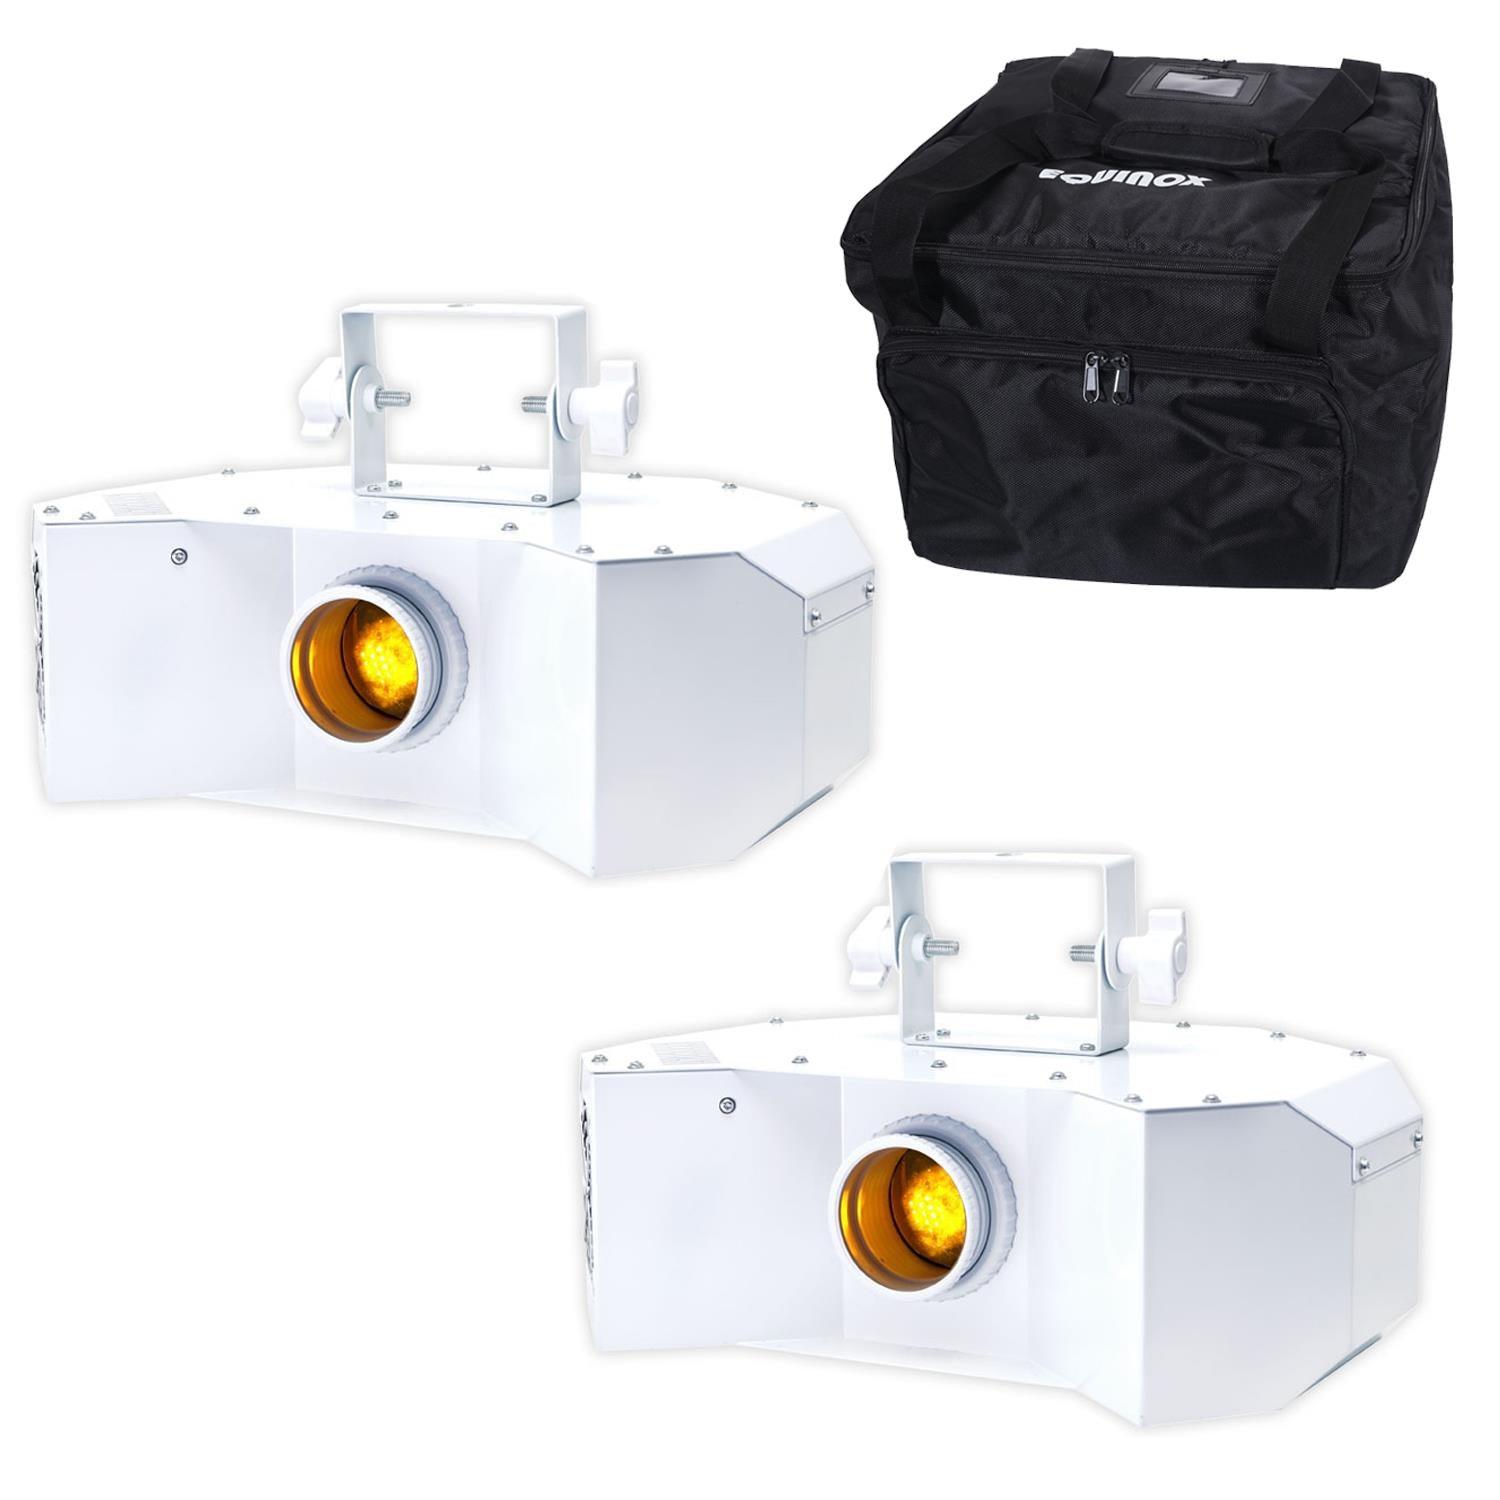 2 x Equinox Helix XP 150w Gobo Flower White with Carry Bag - DY Pro Audio